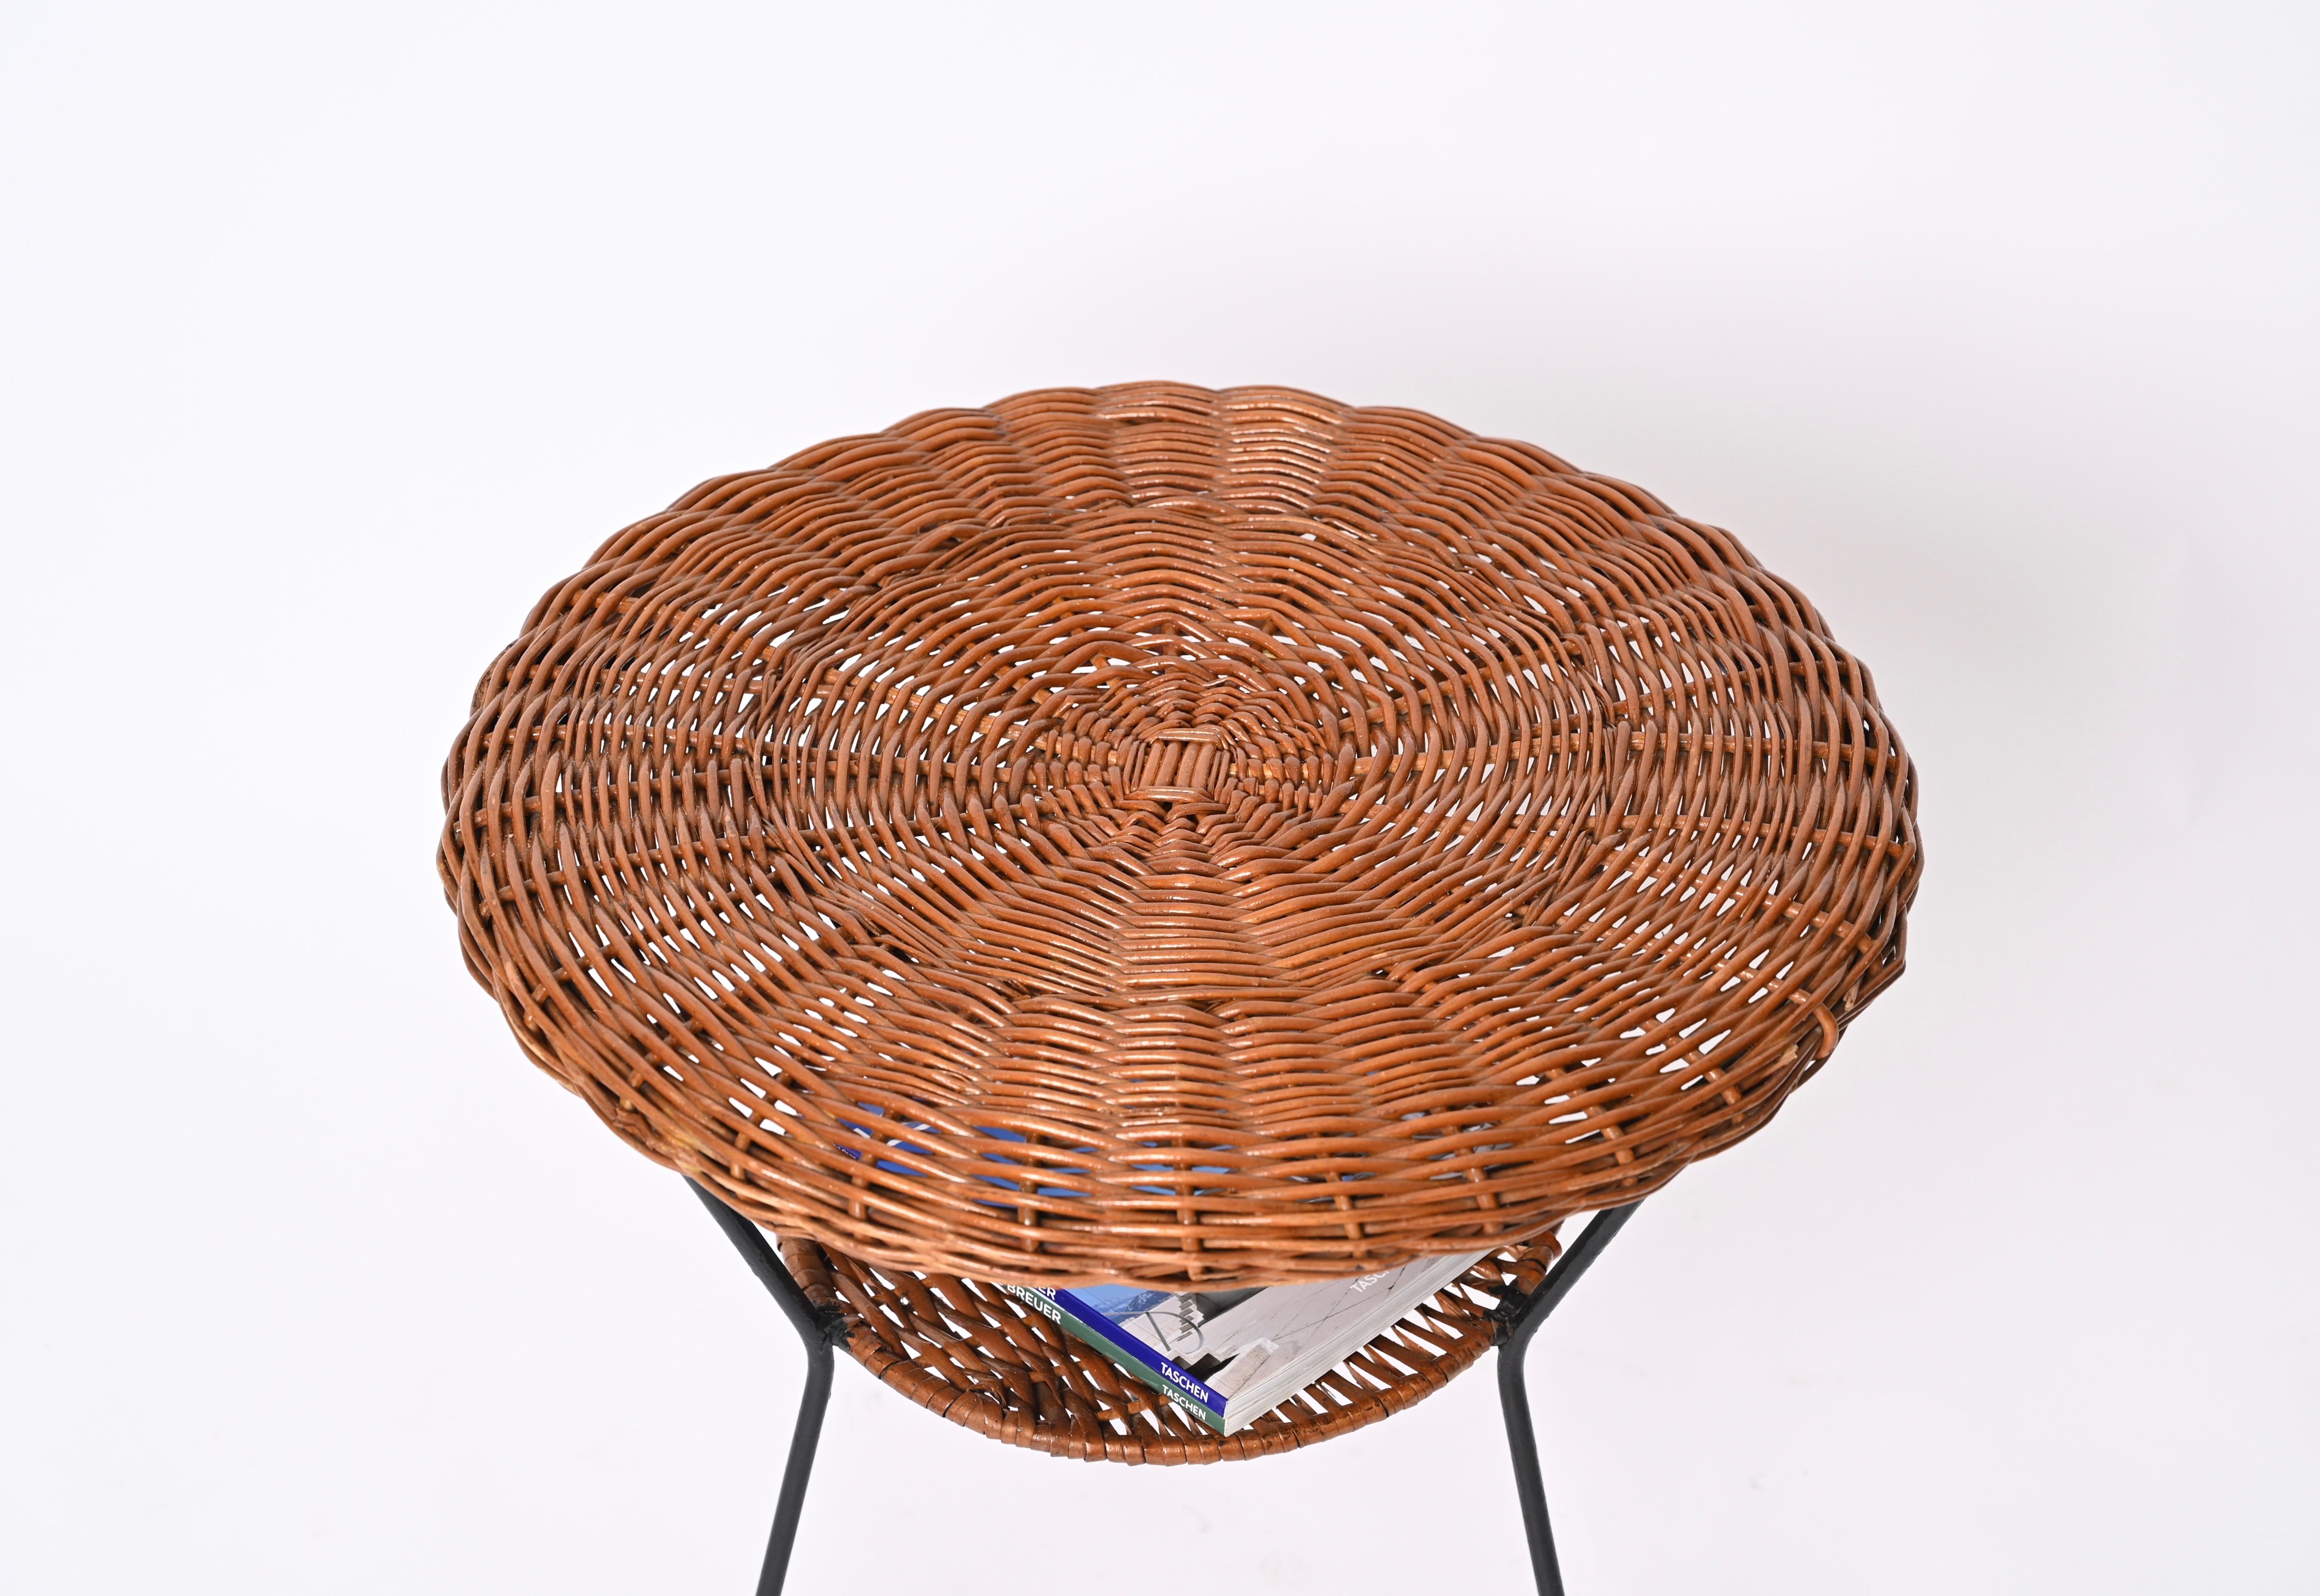 Enameled Woven Rattan, Wicker and Iron Two-Tier Round Coffee Table, Matégot, France 1960s For Sale